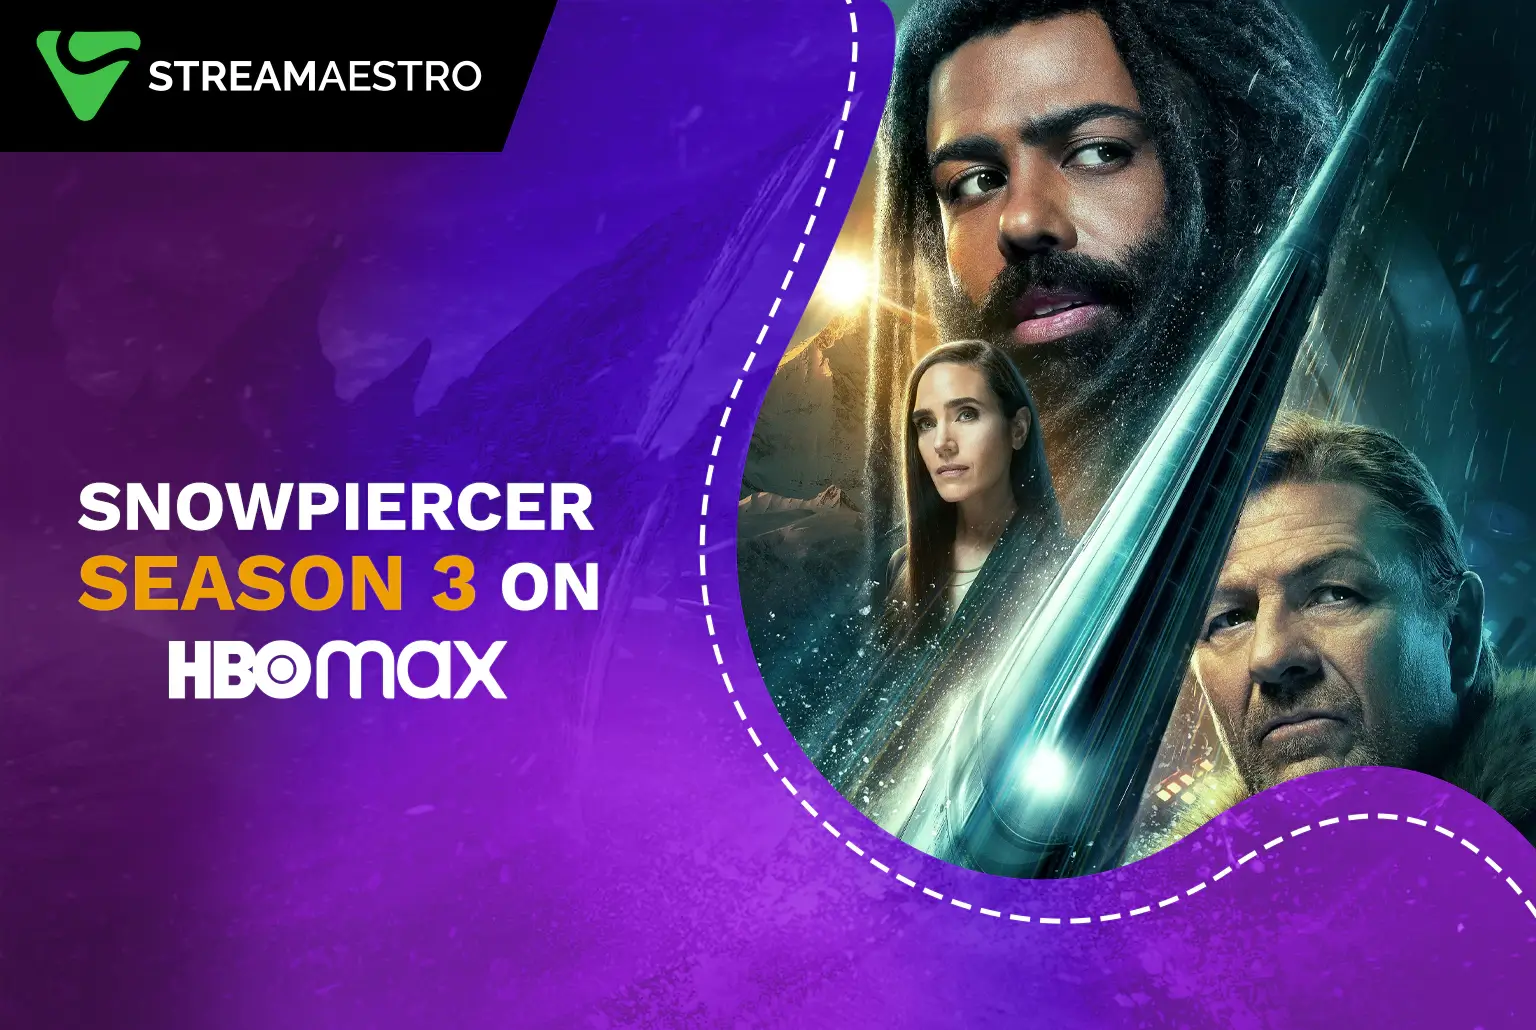 How to Watch Snowpiercer Season 3 on HBO Max